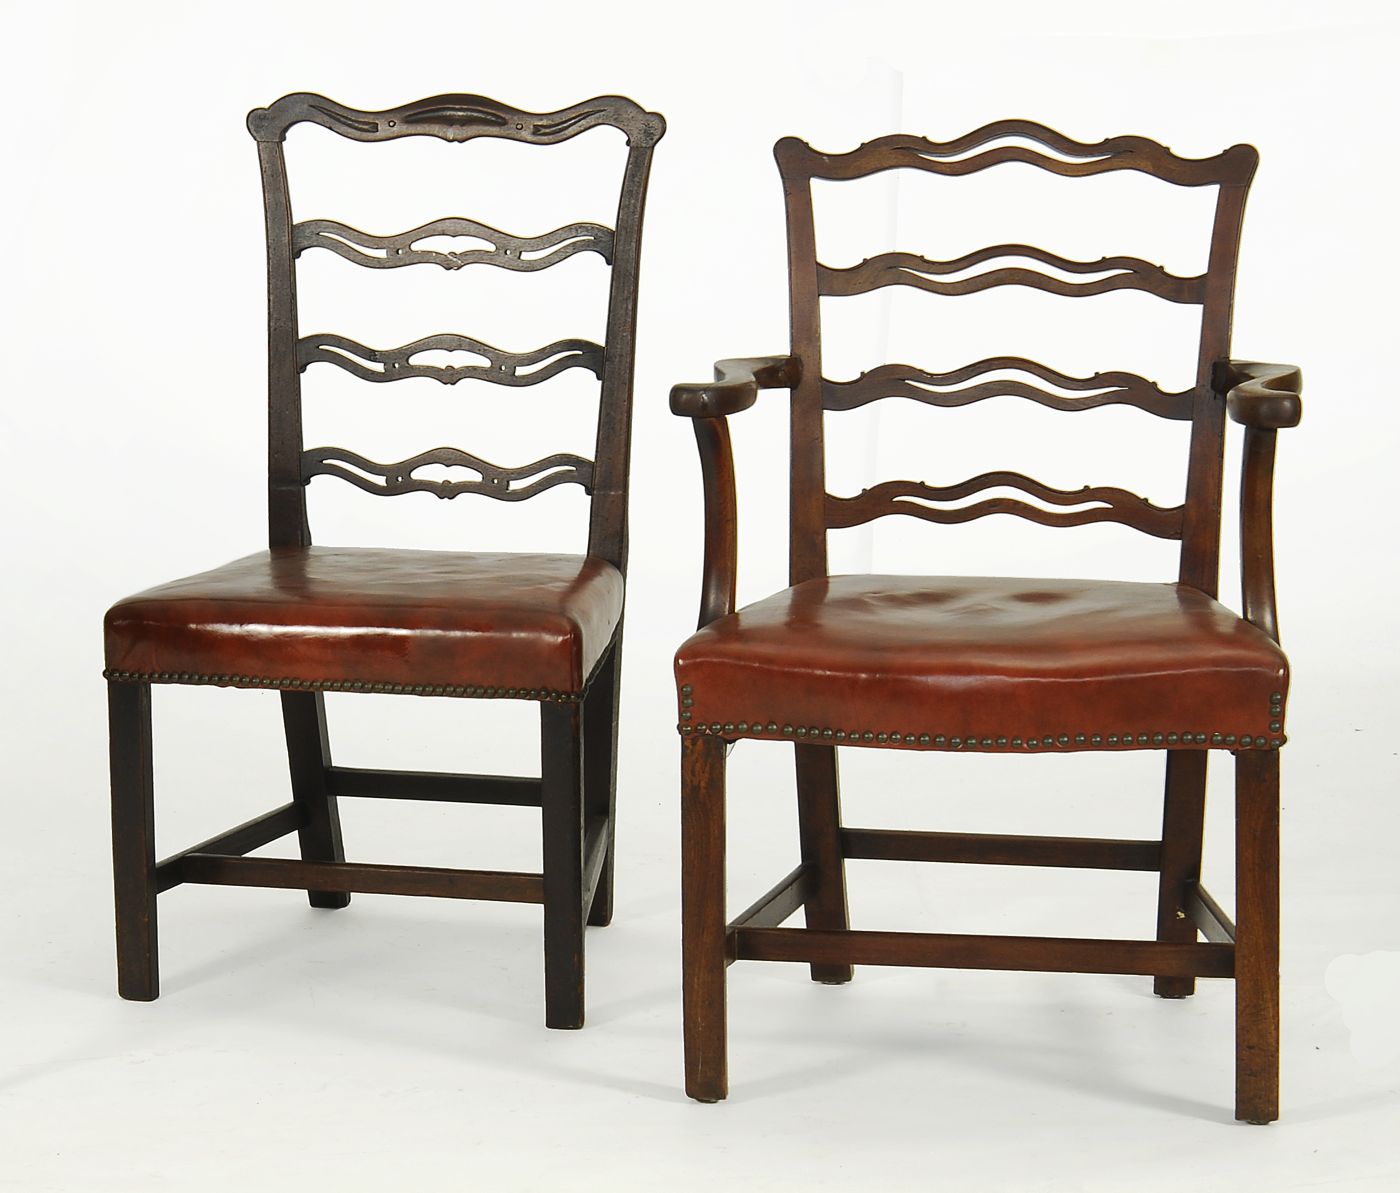 TWO ANTIQUE CHIPPENDALE CHAIRS18th